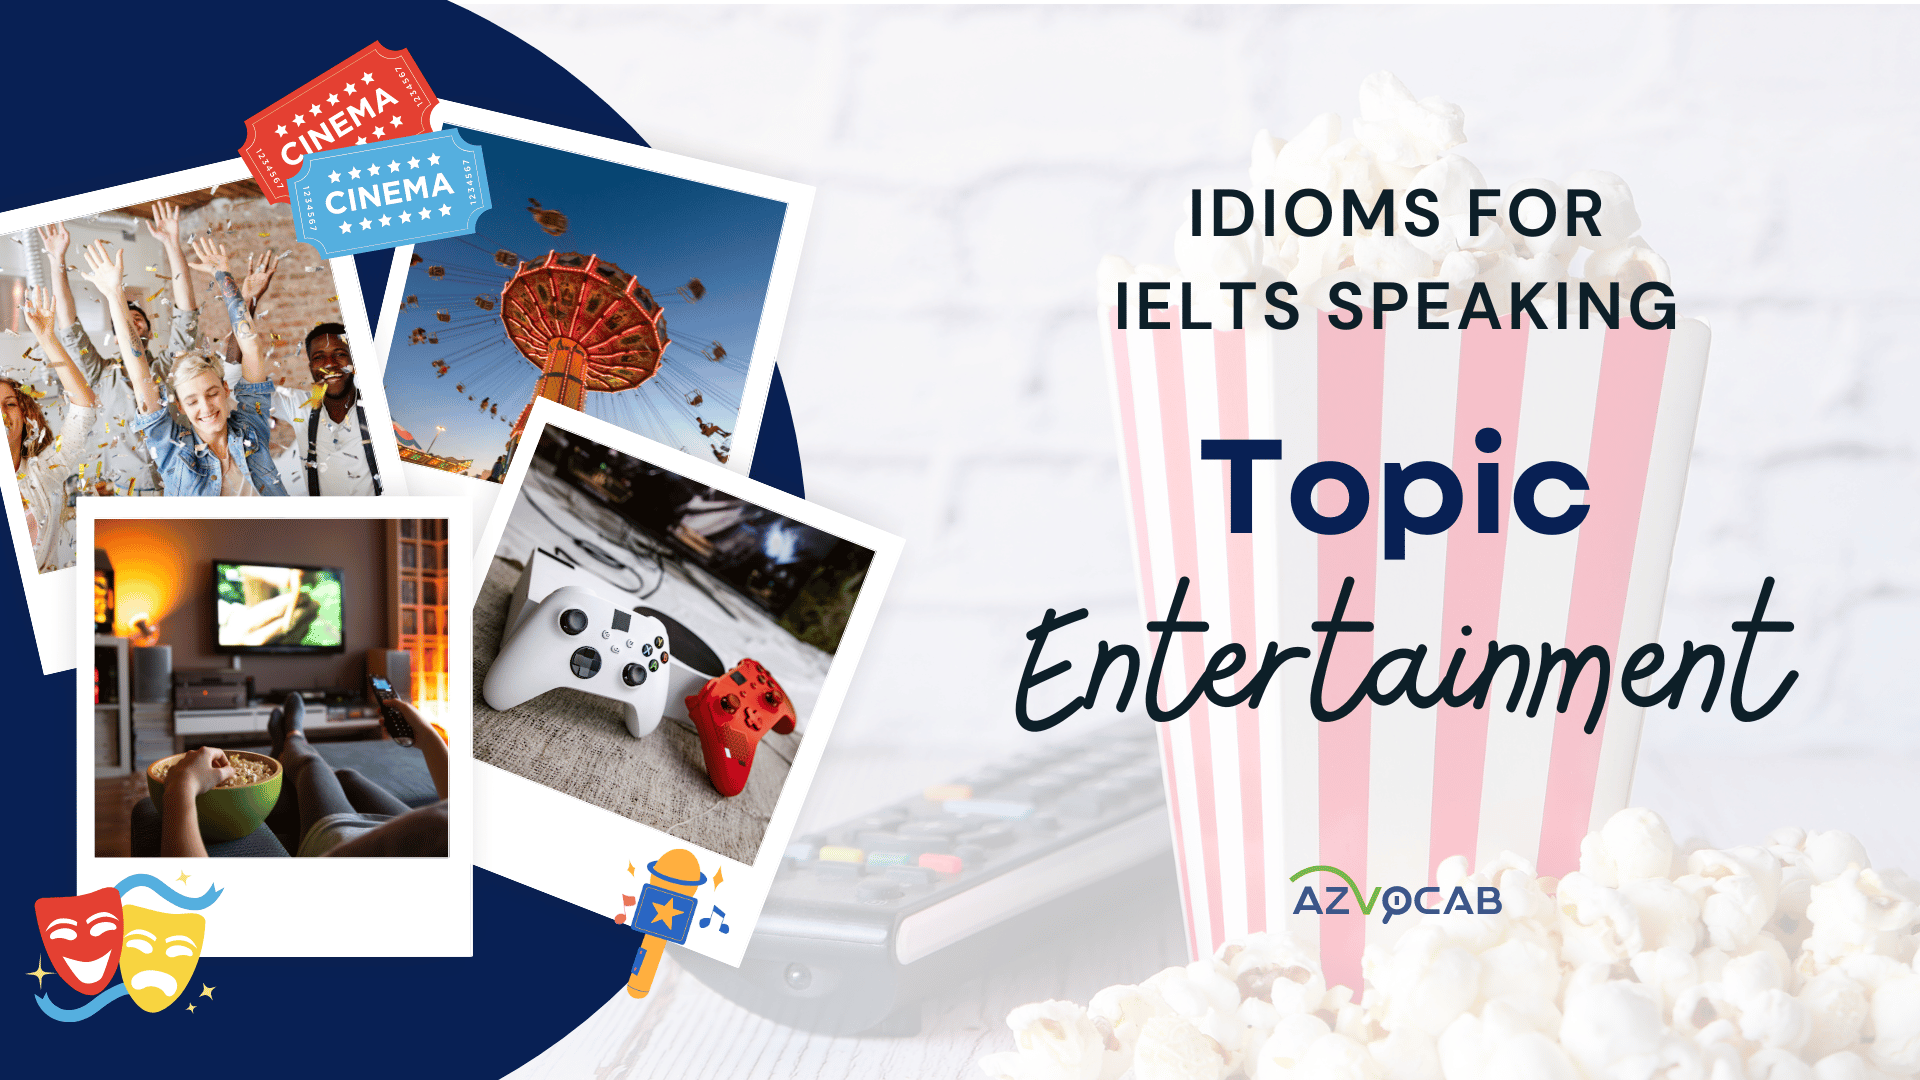 Idioms for IELTS Speaking Entertainment